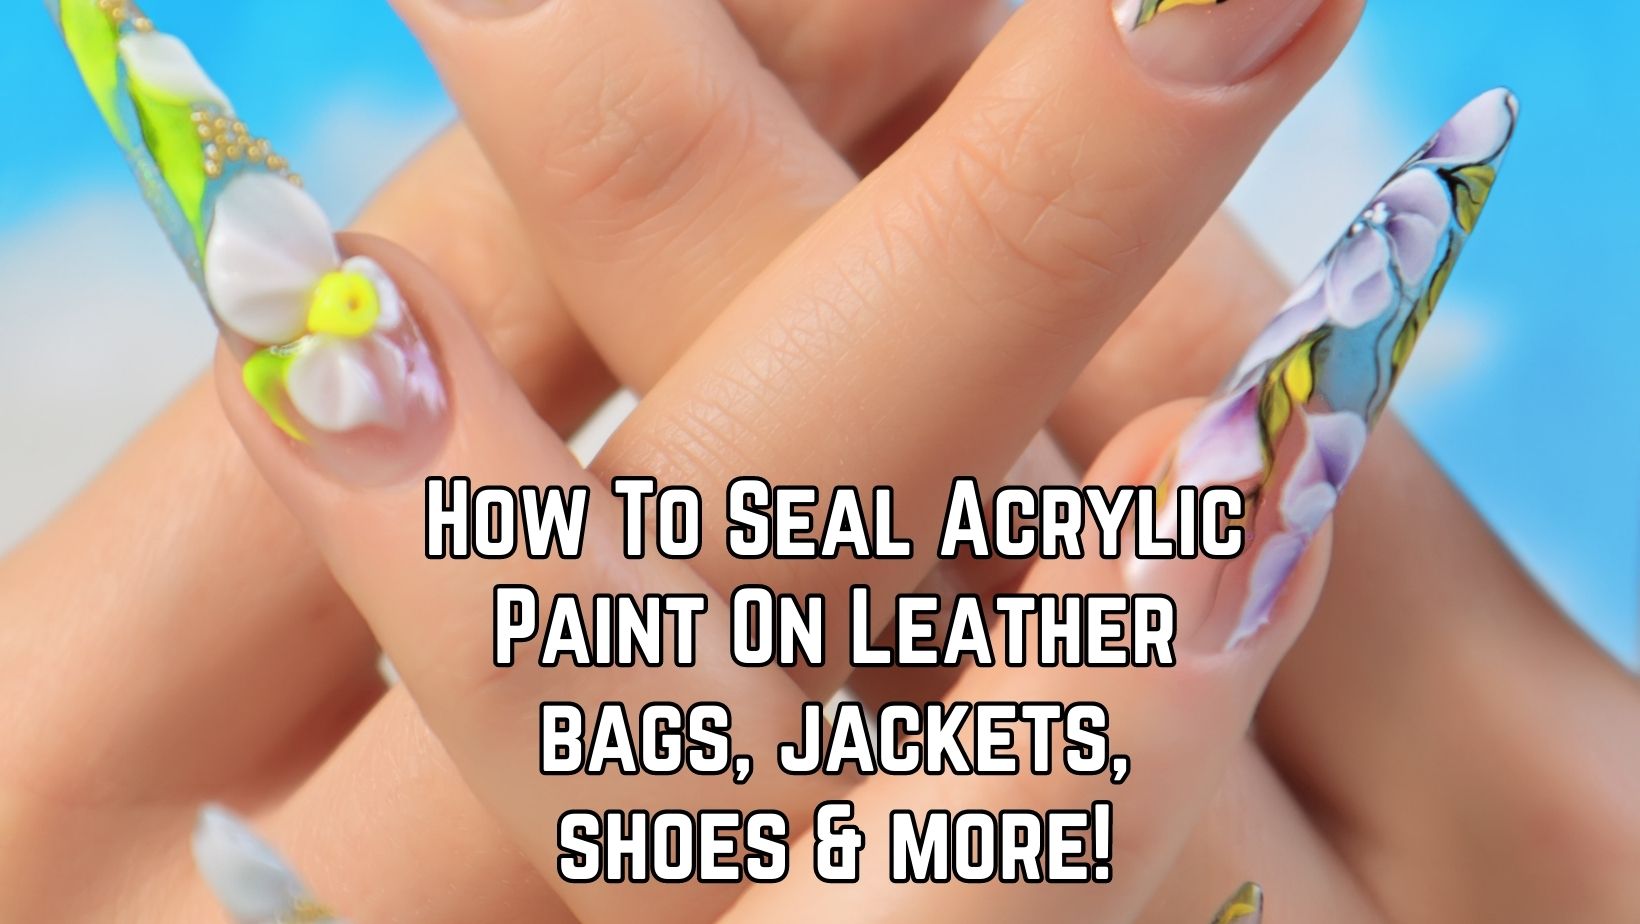 How To Seal Acrylic Paint On Leather? 7 Steps Guide